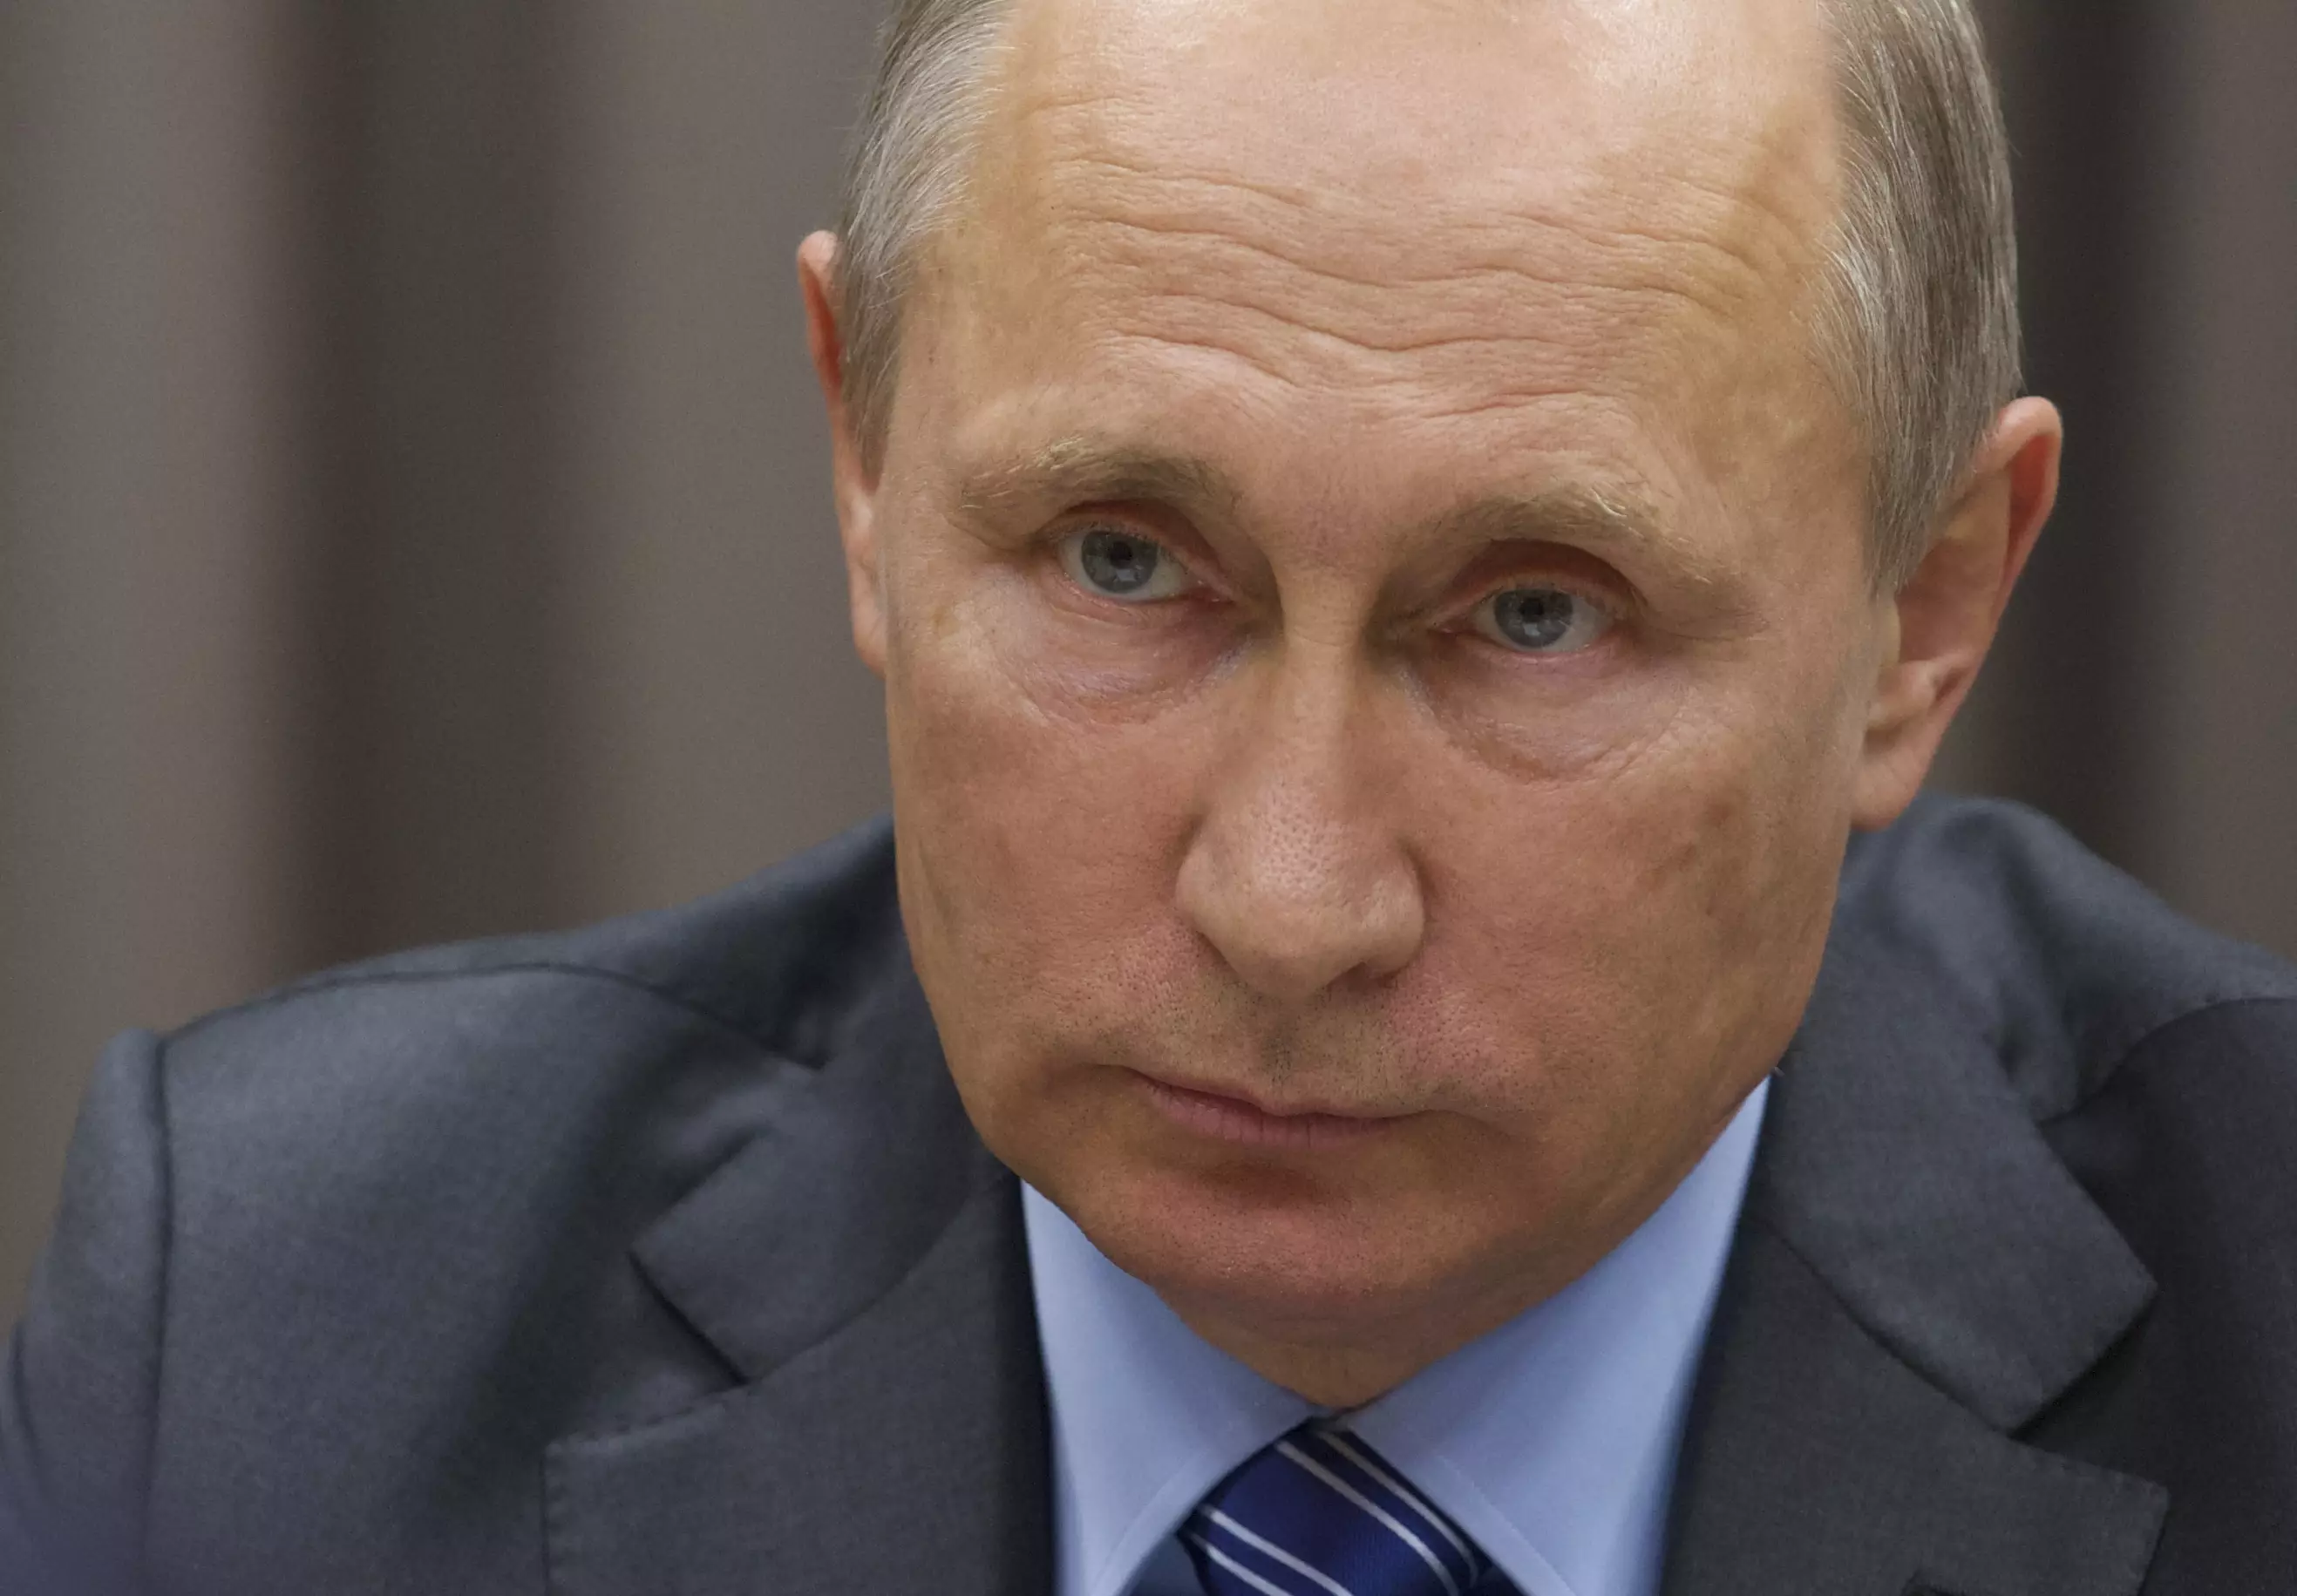 Putin Has Been Accused Of Spiking US Diplomats With Date Rape Drug